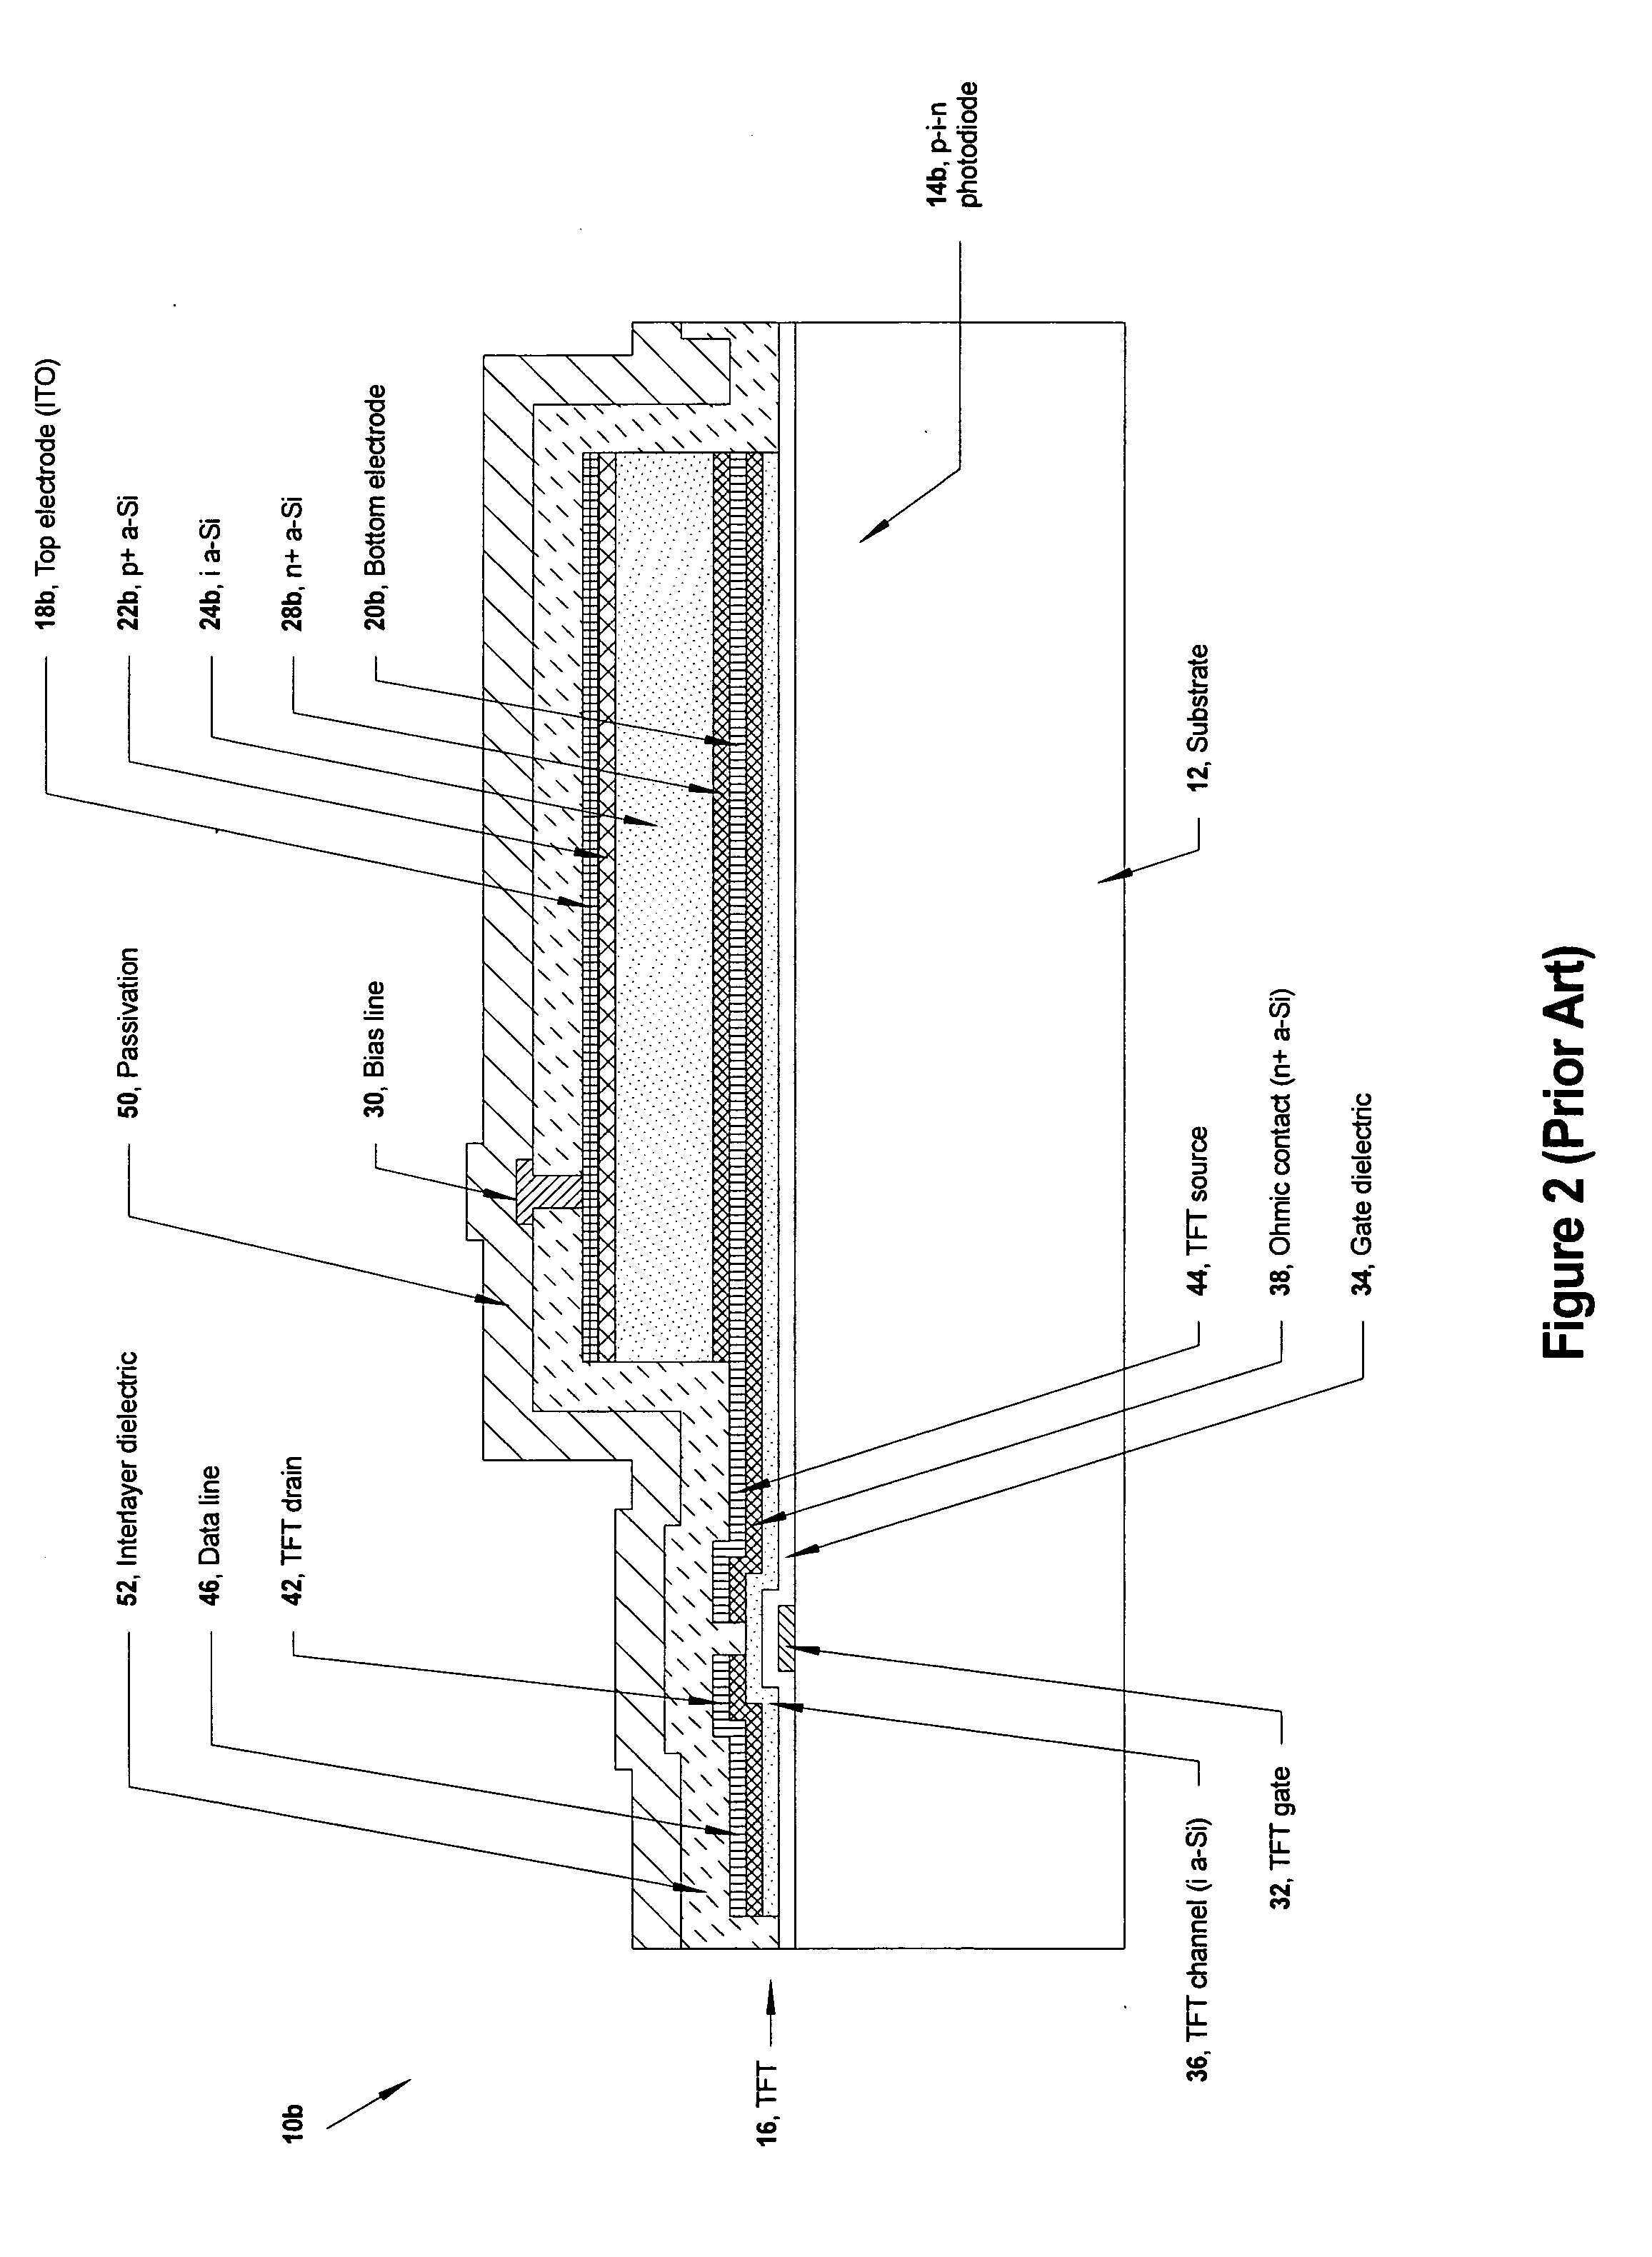 Integrated MIS photosensitive device using continuous films